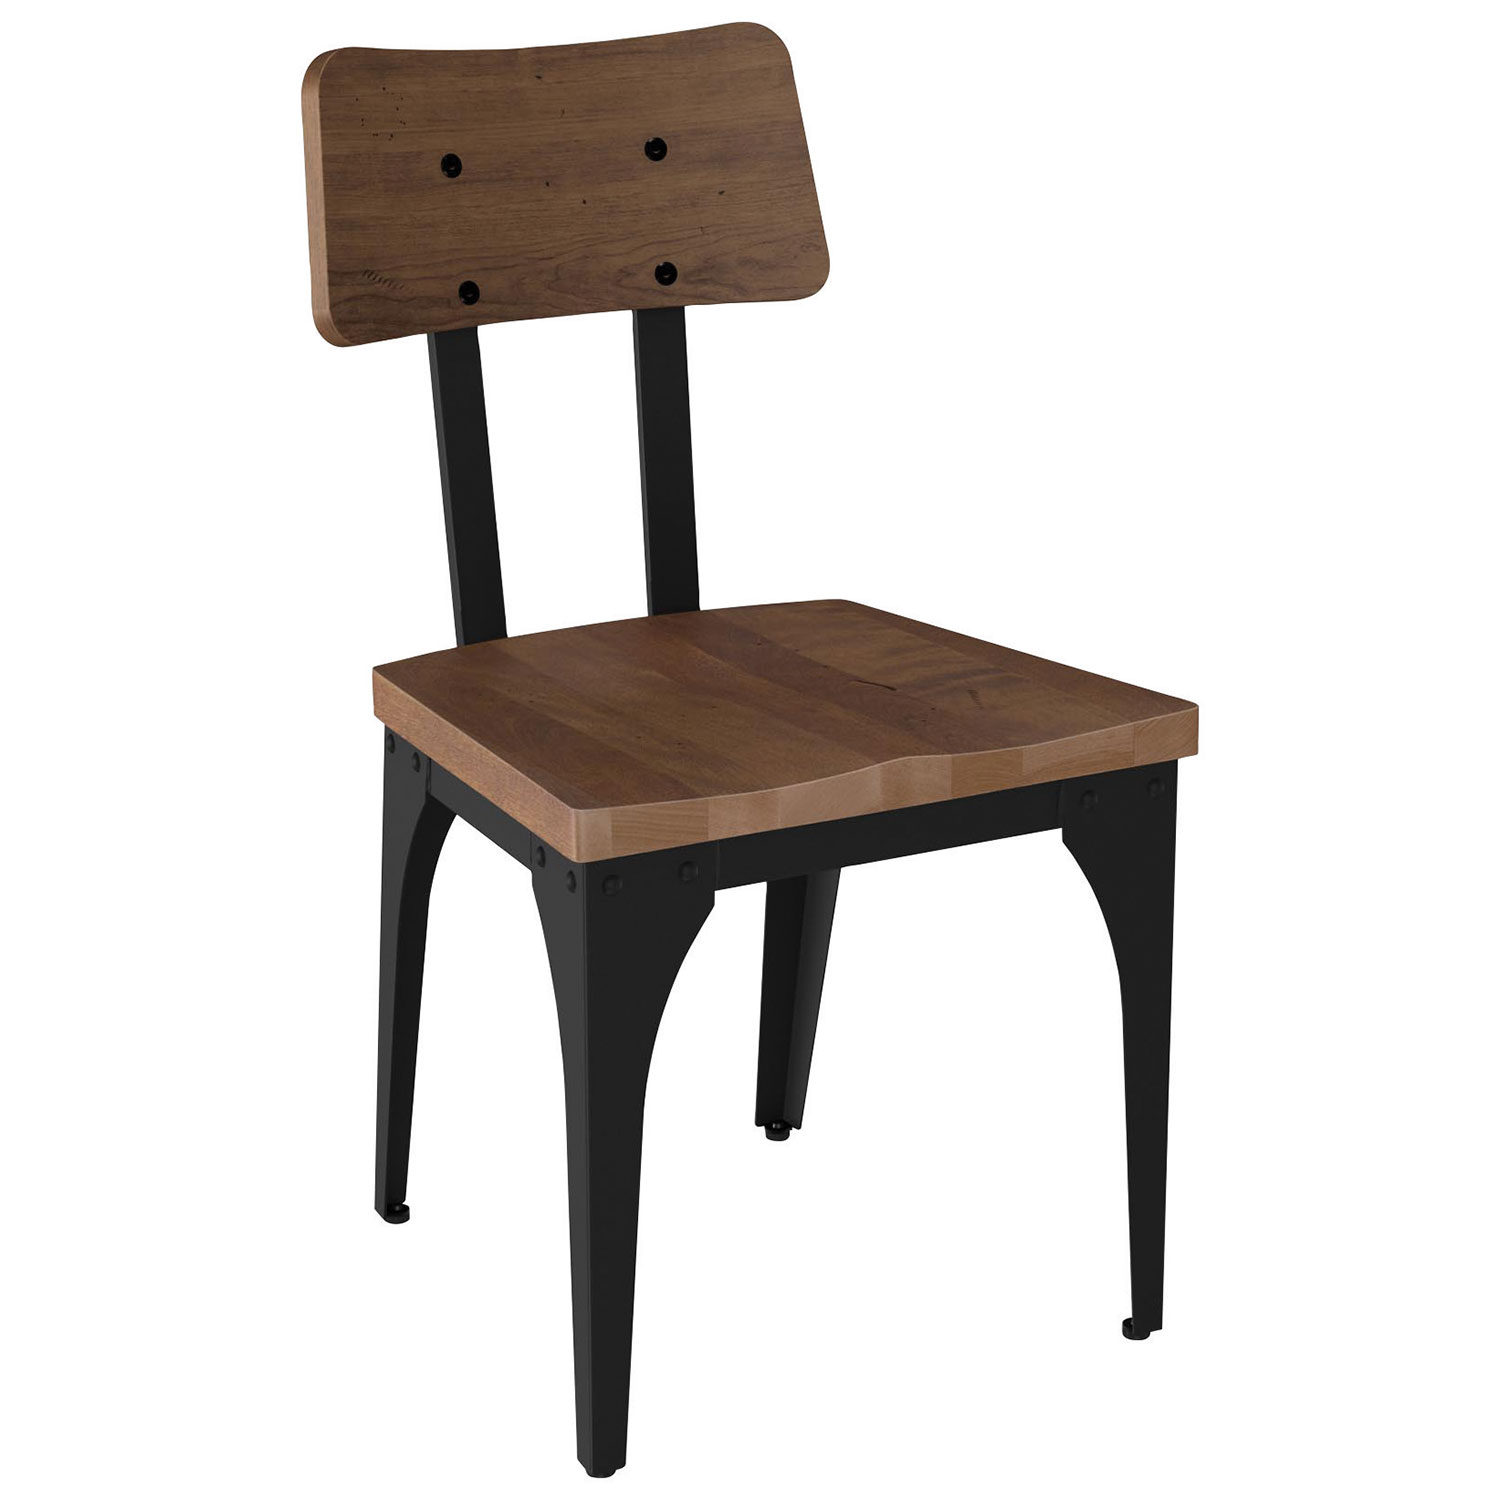 Woodland Modern Dining Chair - Set of 2 - Black Coral/Toasty